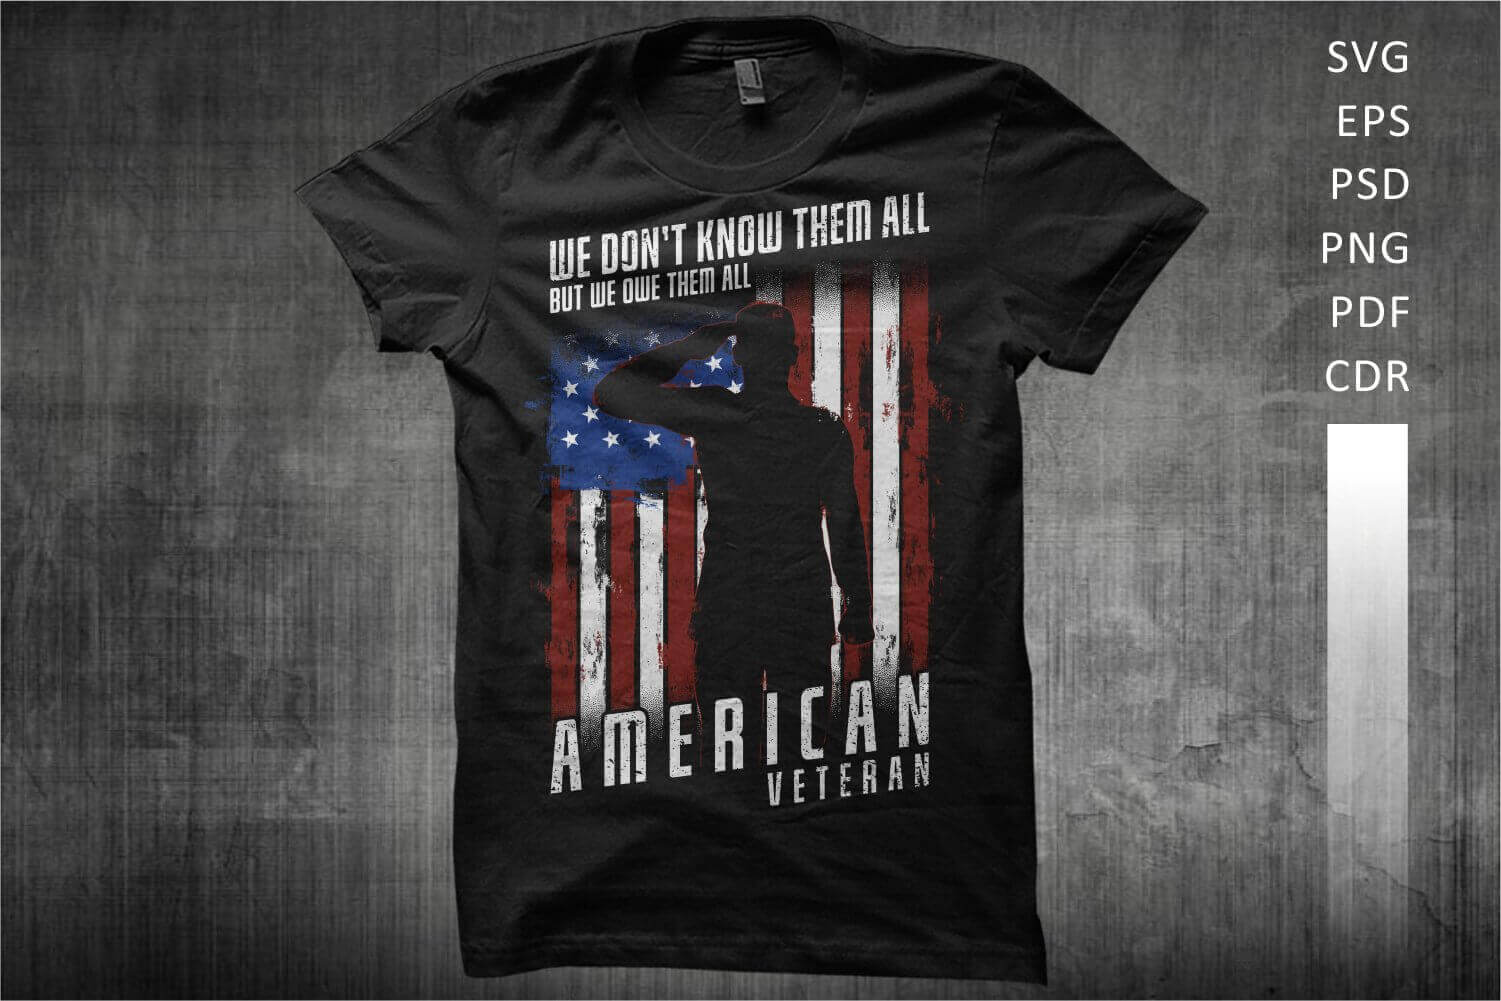 Black t-shirt with a silhouette and the inscription American Veteran.